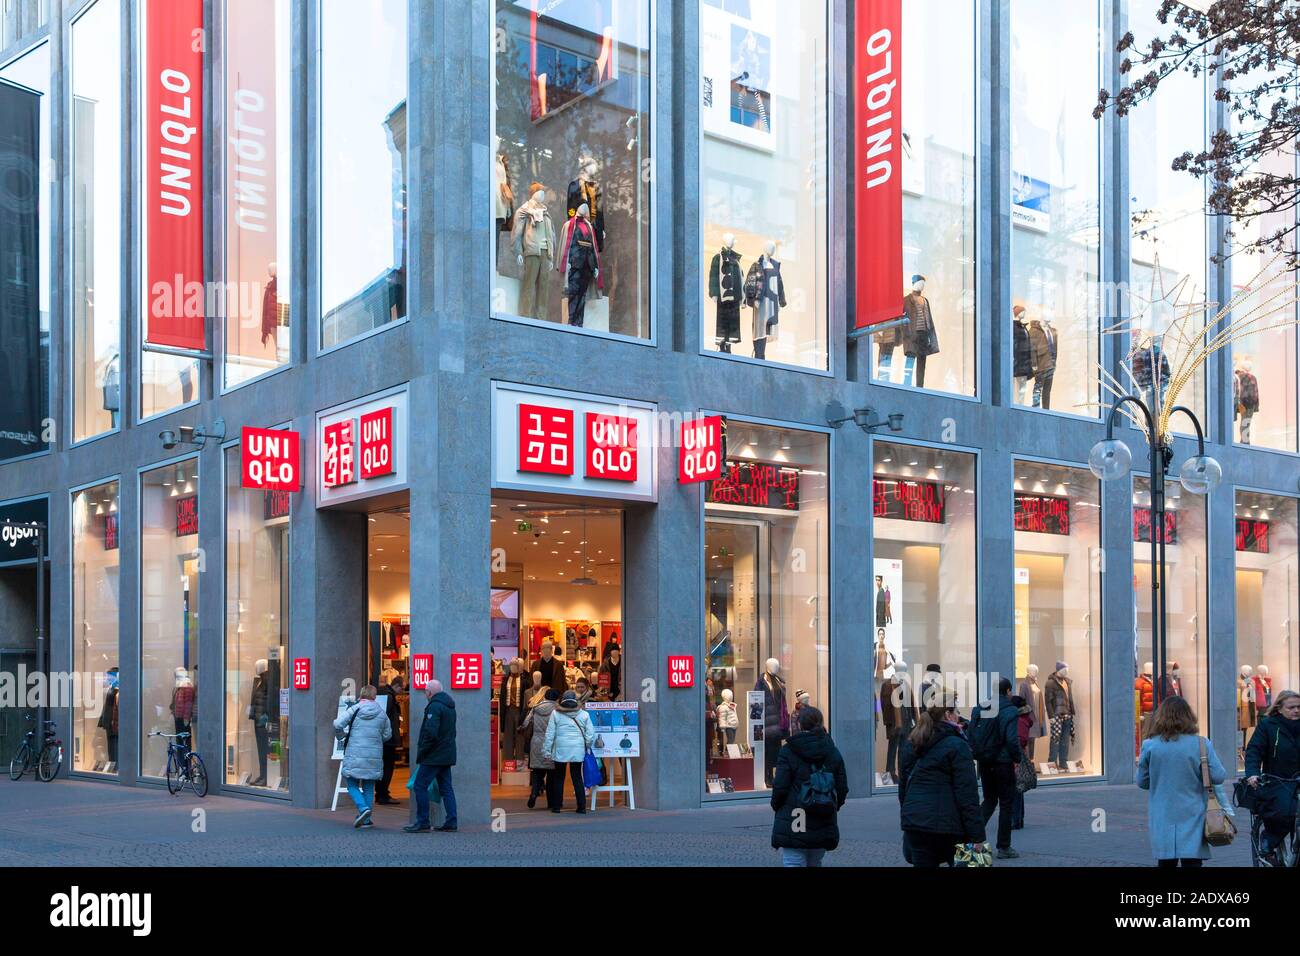 Uniqlo department store High Resolution Stock Photography and Images - Alamy